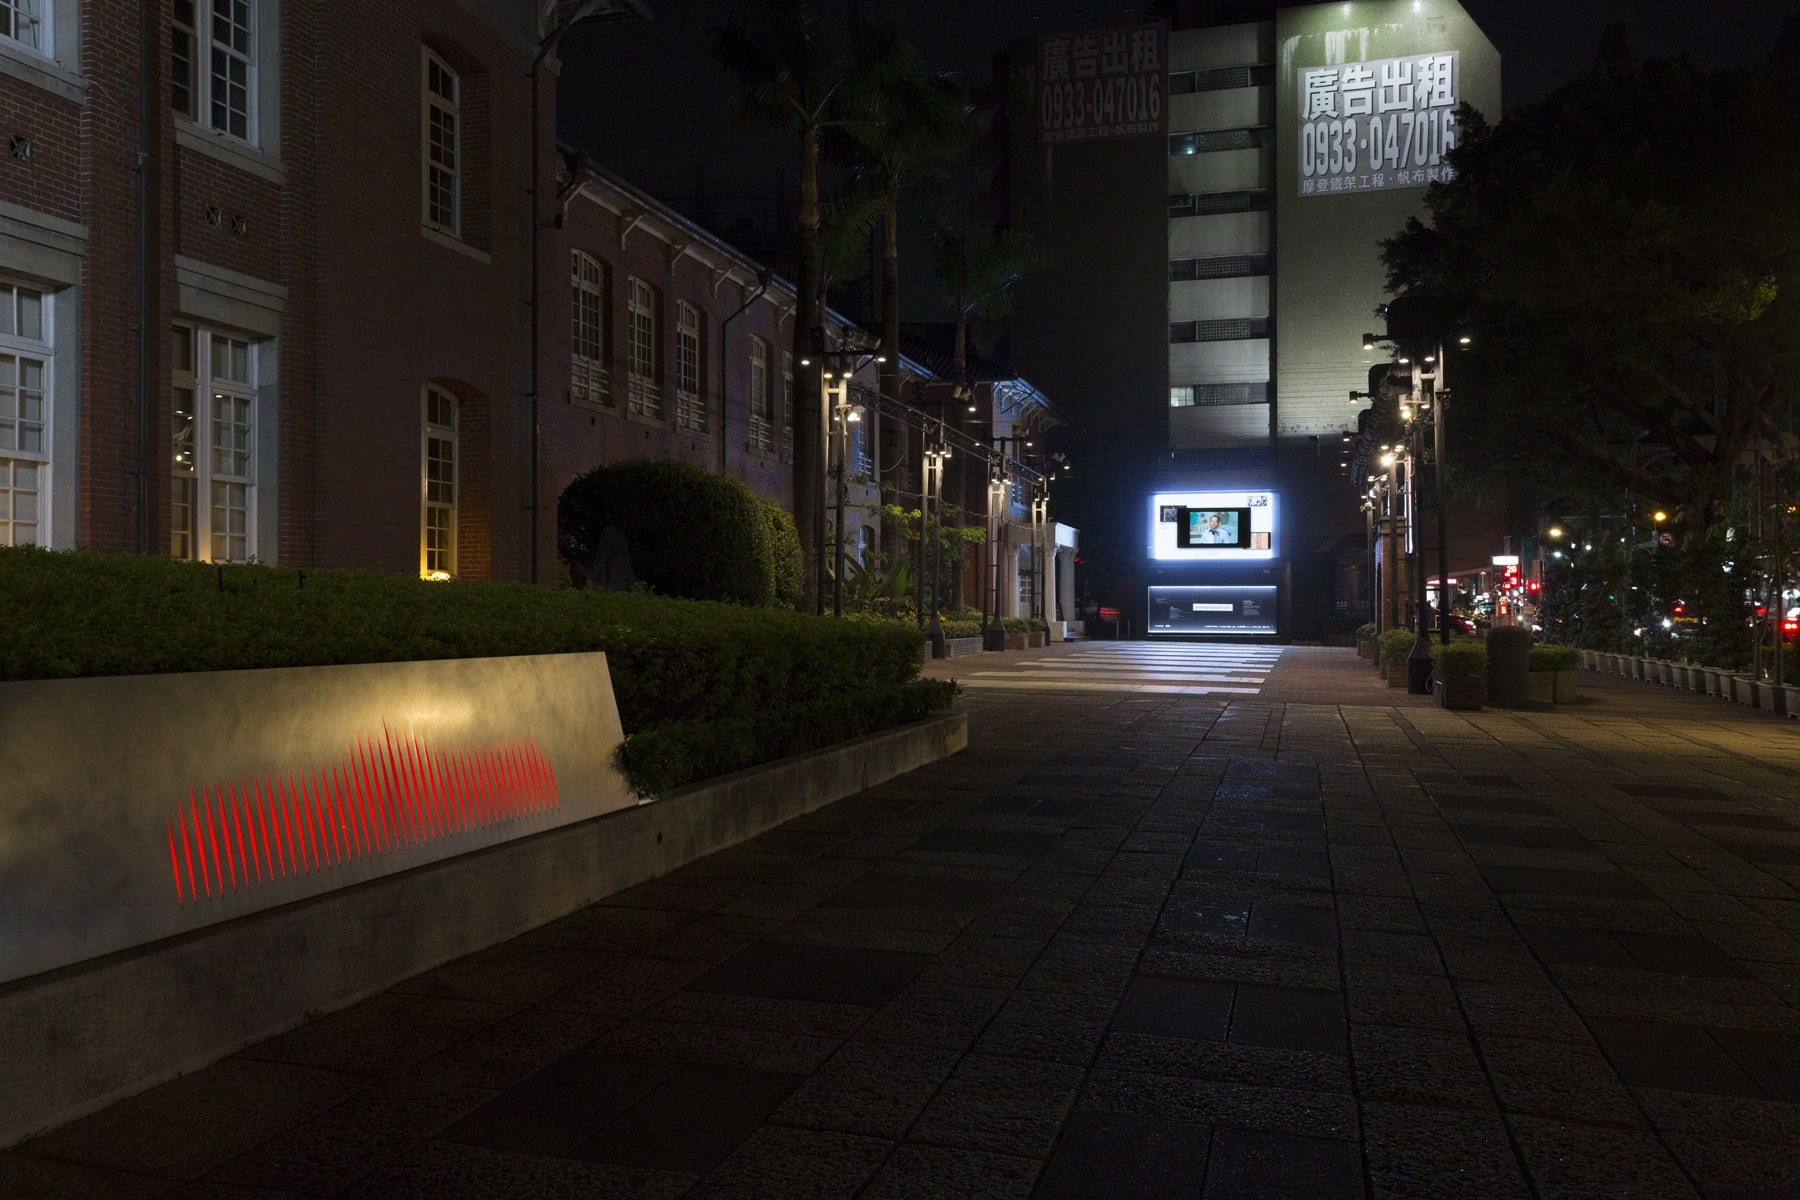 At night, there is a large LED screen in the front of the square in front of the Japanese-style historic building of the Museum of Contemporary Art Taipei, playing the video works of Taiwanese artist Wu Chi-Yu. In the lower left corner of the screen, you can see the linear logo of the Museum of Contemporary Art Taipei is slightly revealing red light.